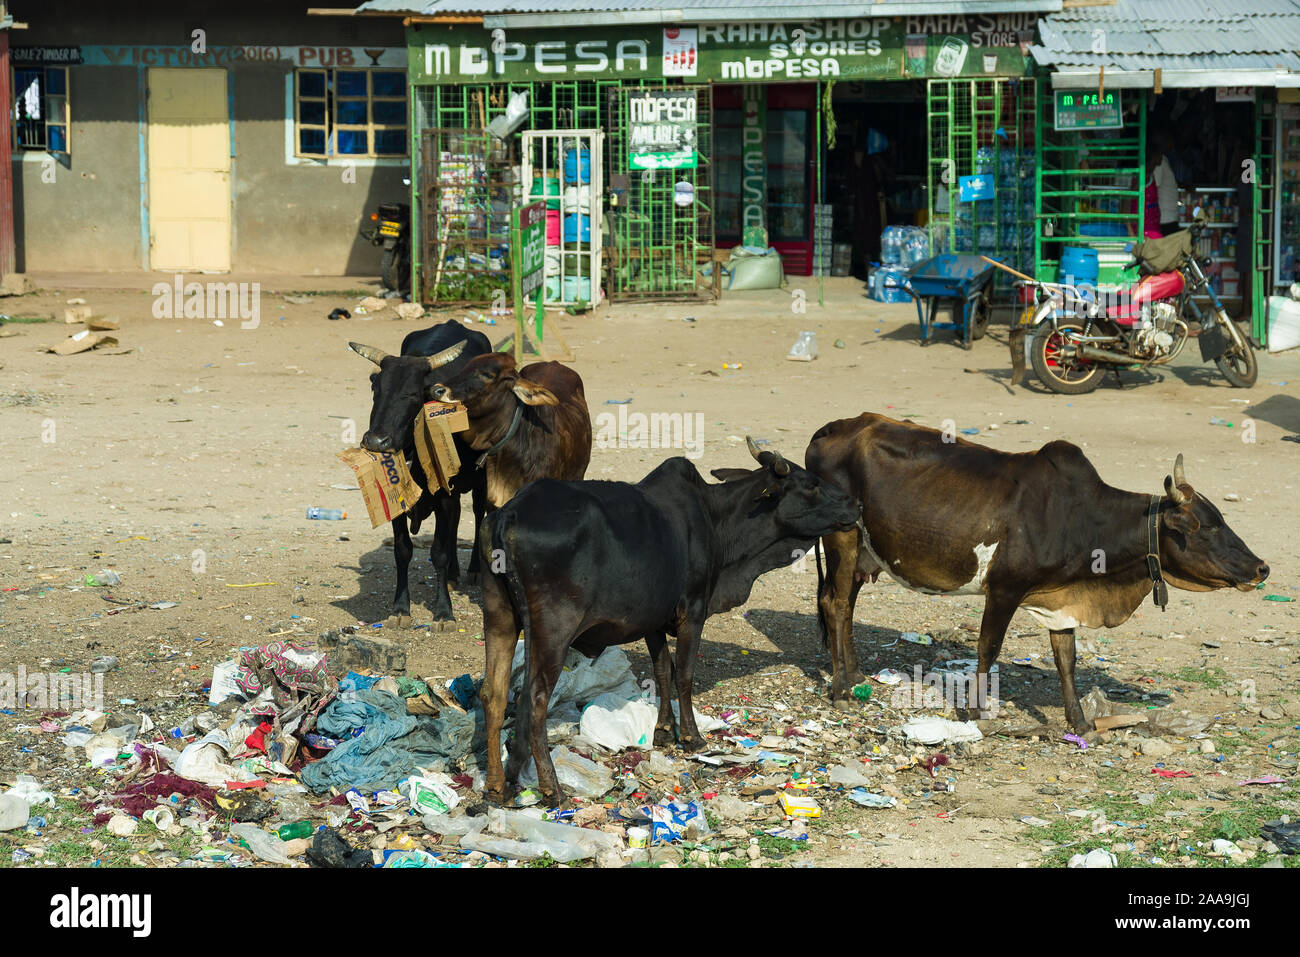 Boran cows eating discarded rubbish left outside small shops, Kenya, East Africa Stock Photo